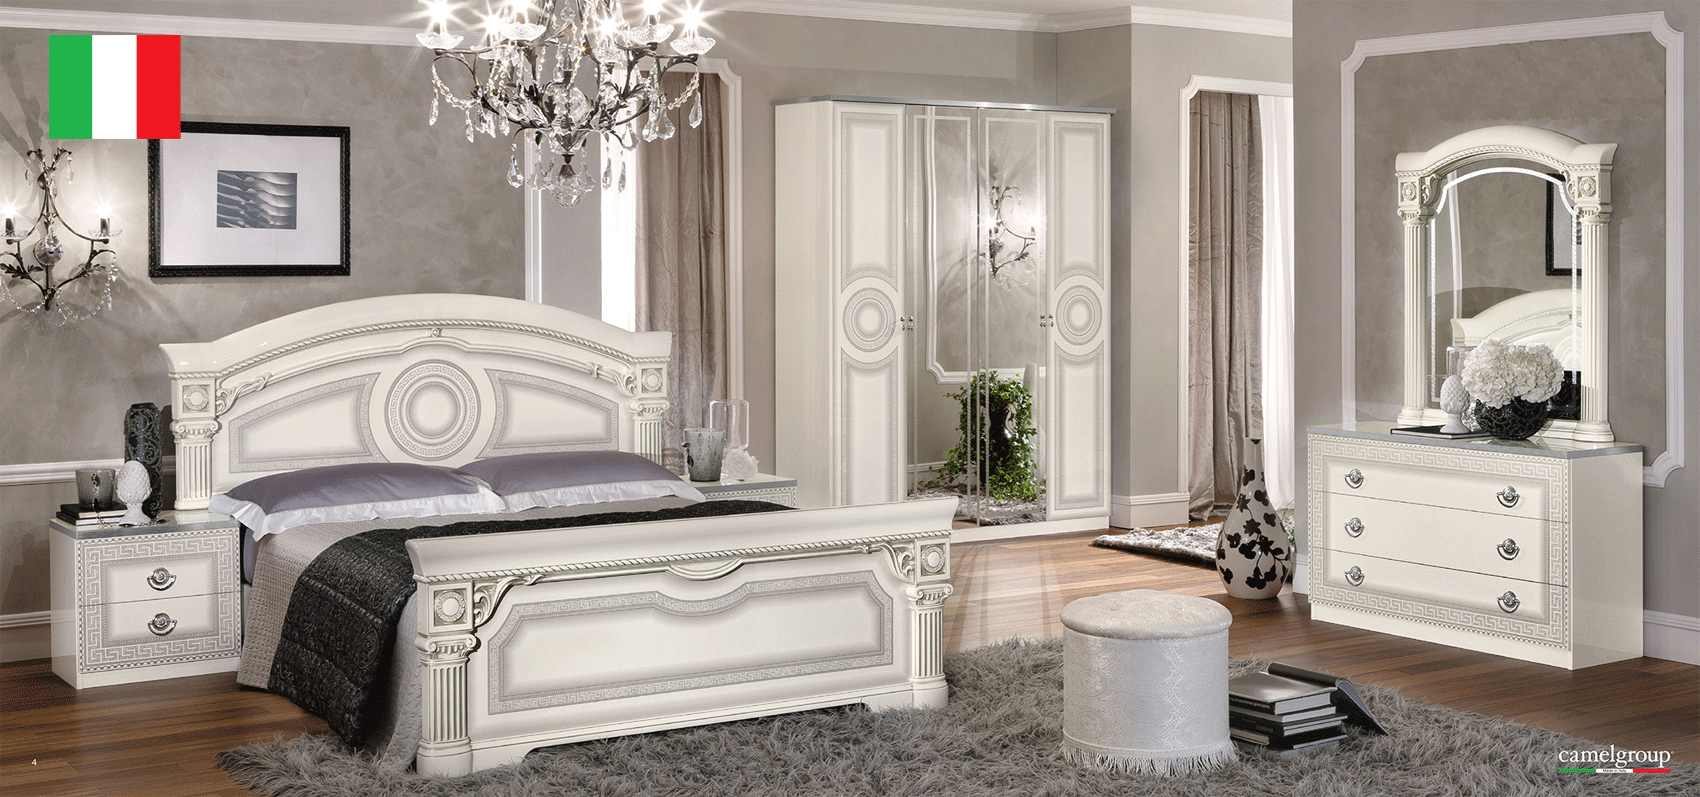 Bedroom Furniture Beds with storage Aida Bedroom, White w/Silver, Camelgroup Italy